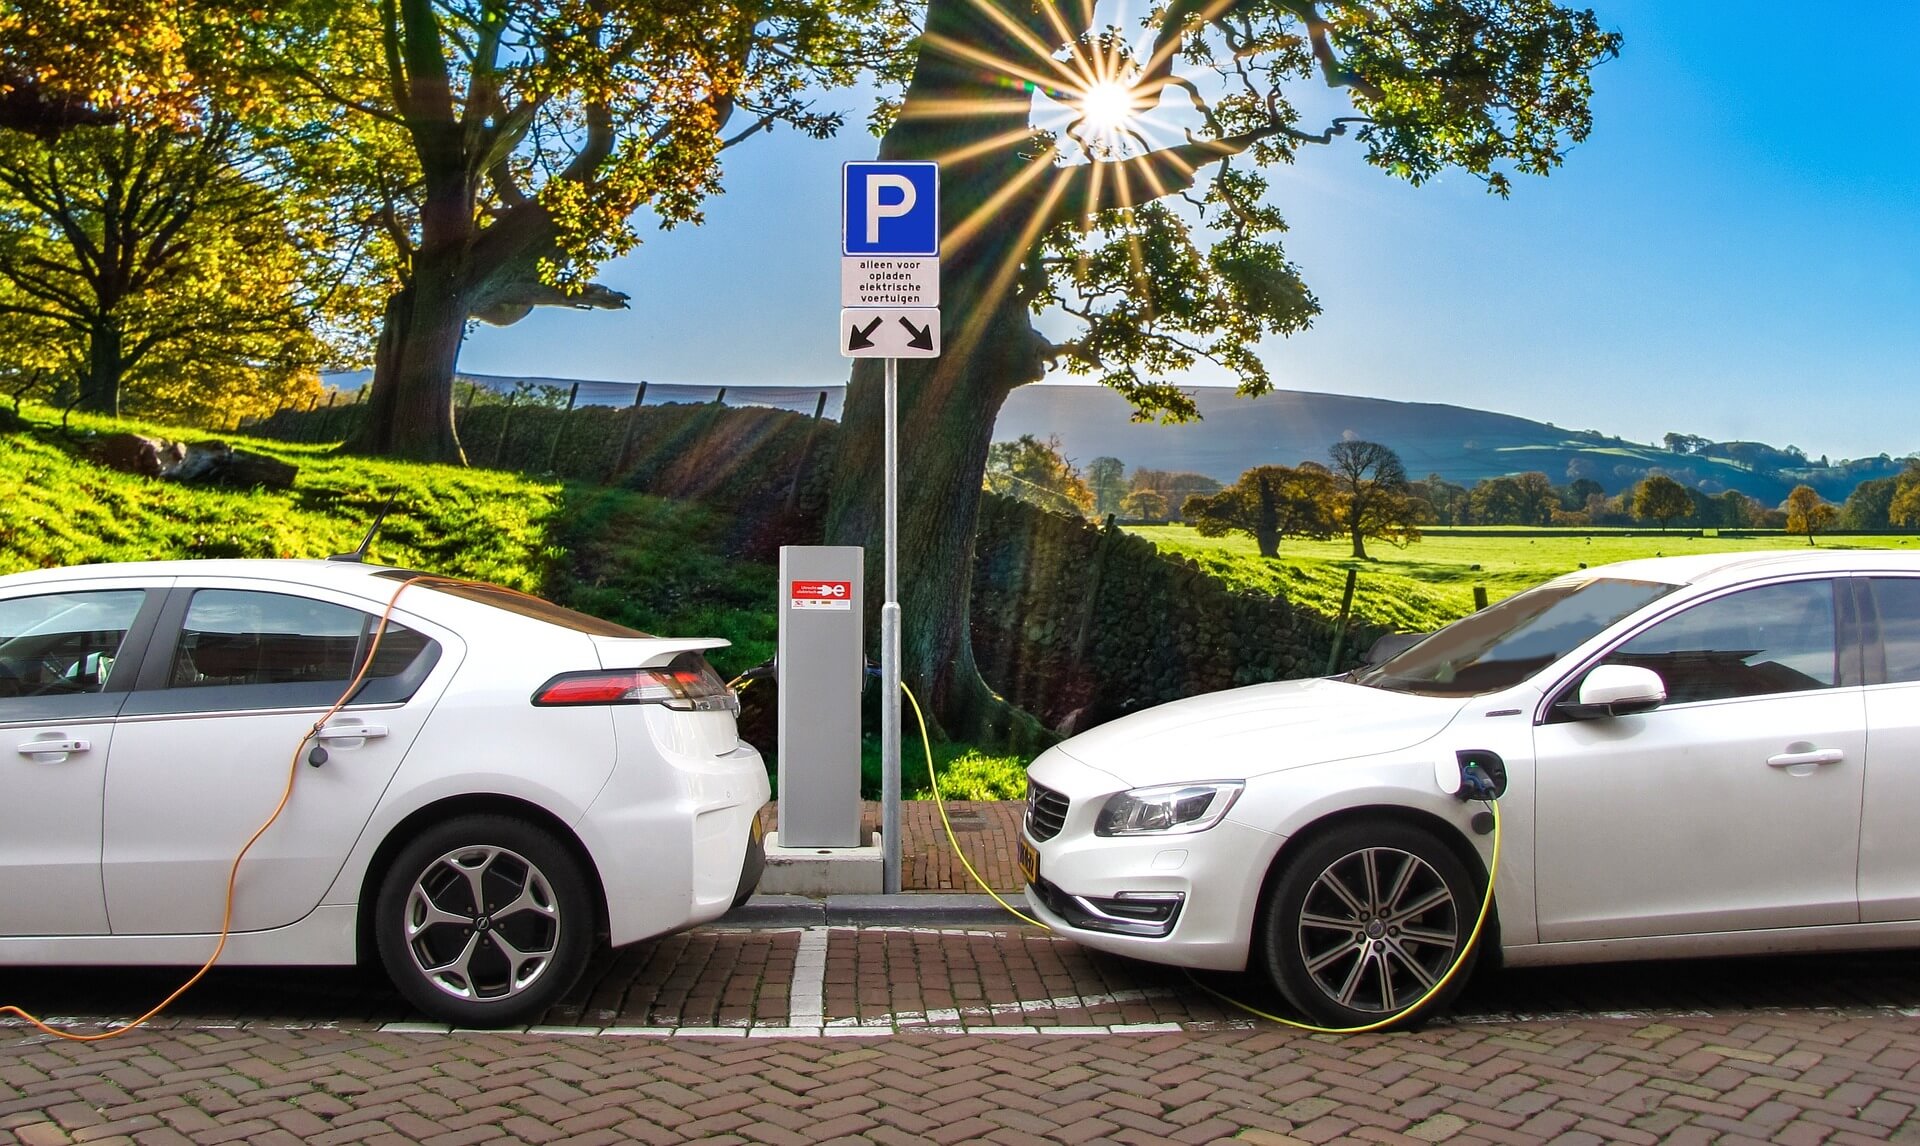 electric cars pros and cons